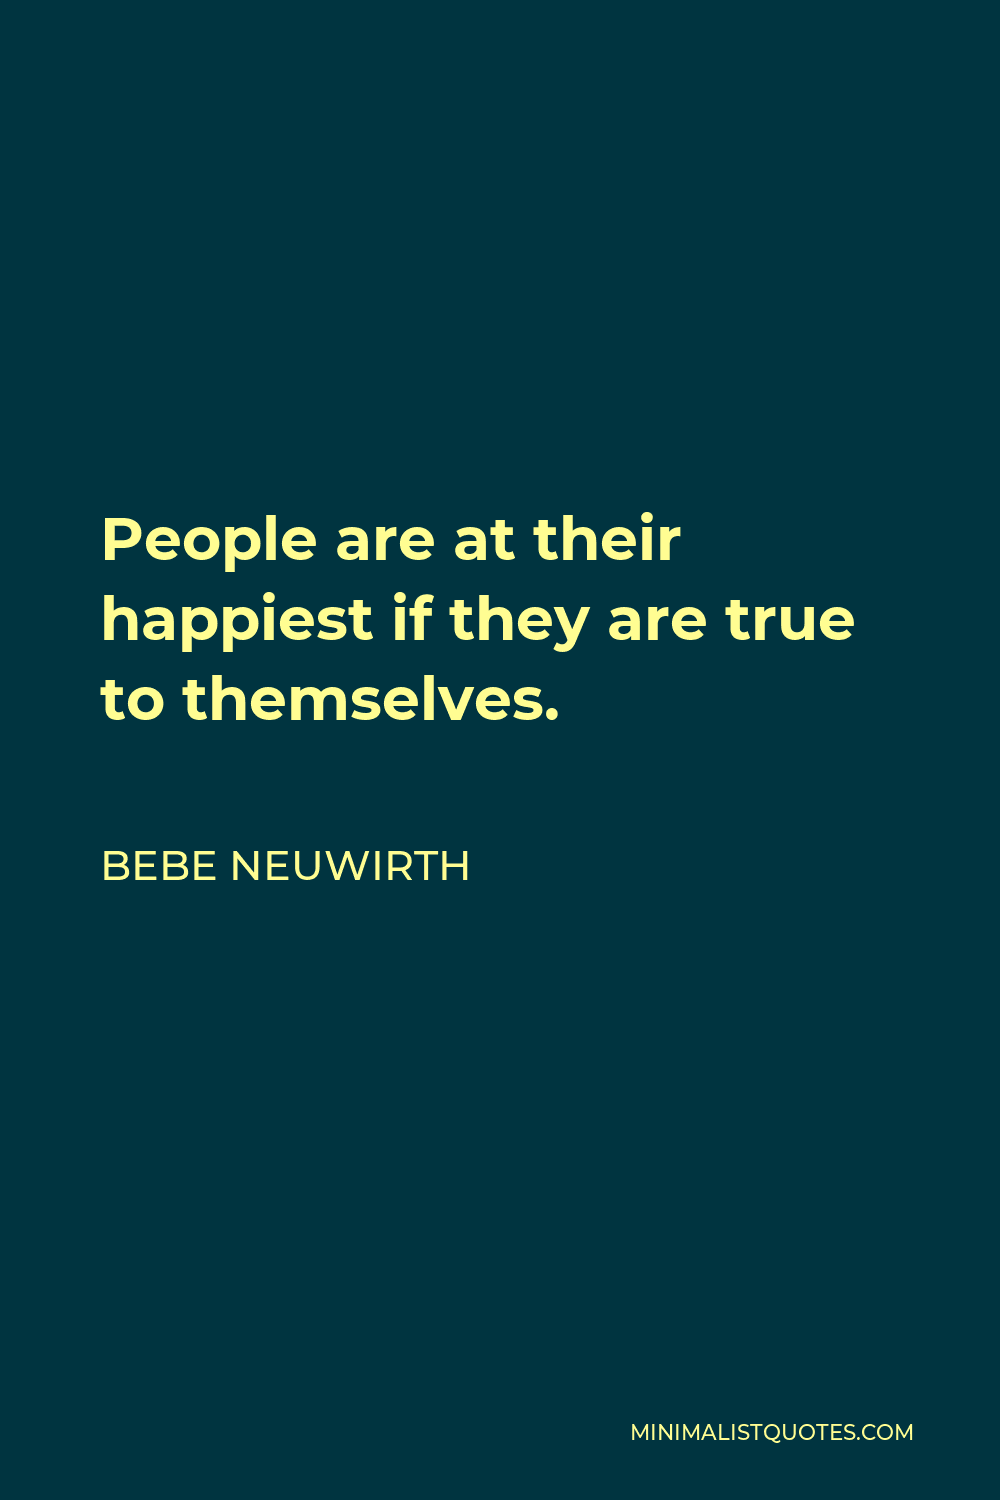 Bebe Neuwirth Quote - People are at their happiest if they are true to themselves.